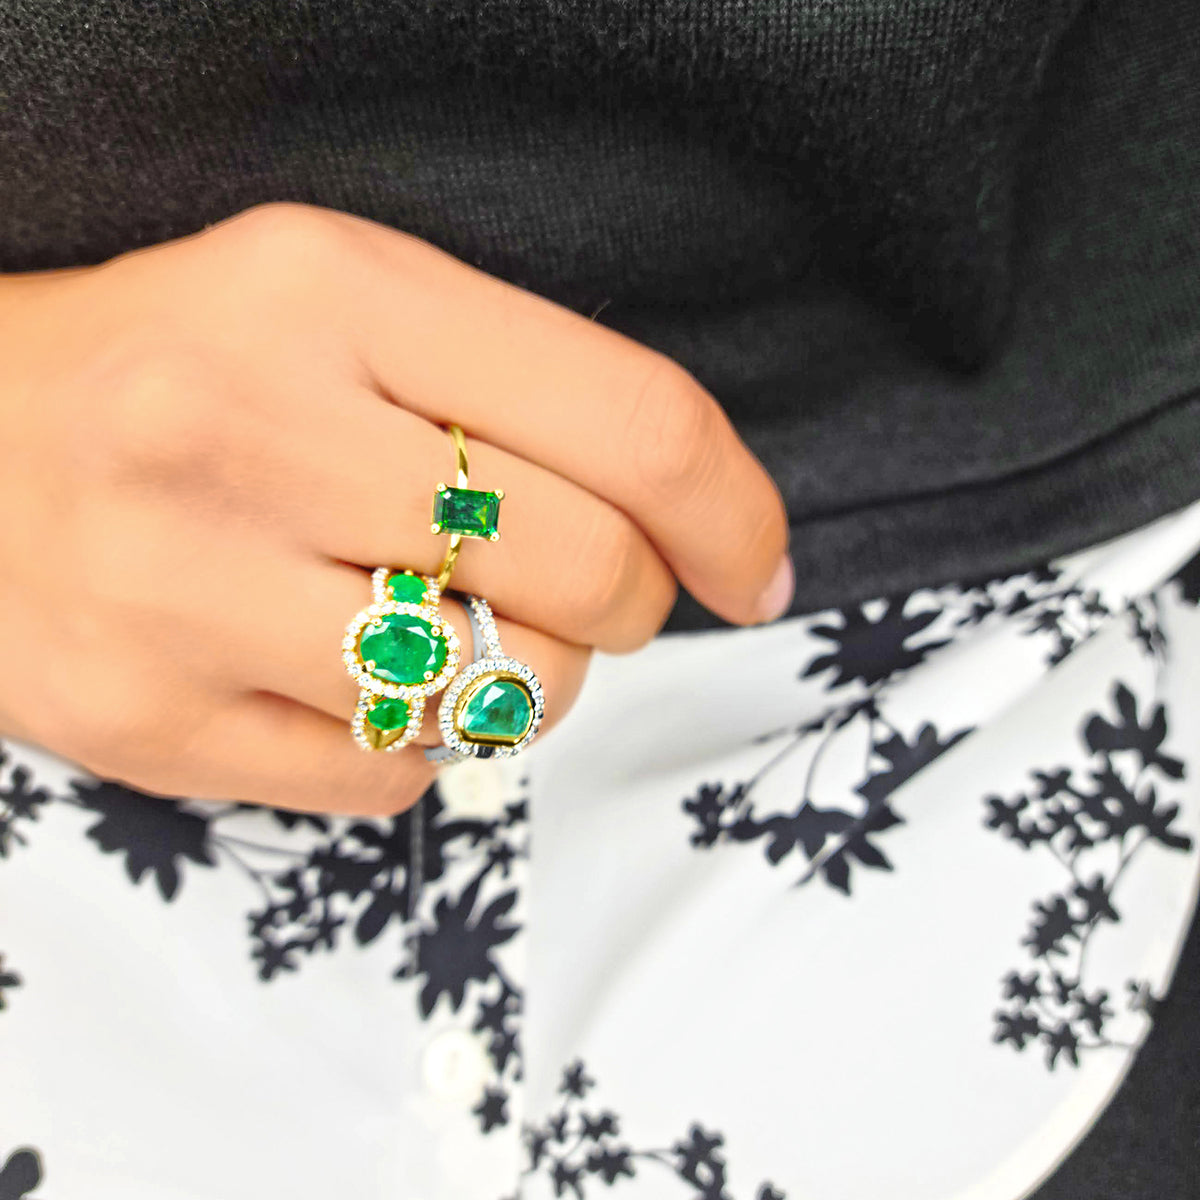 Gold Emerald Rings Worn by Woman